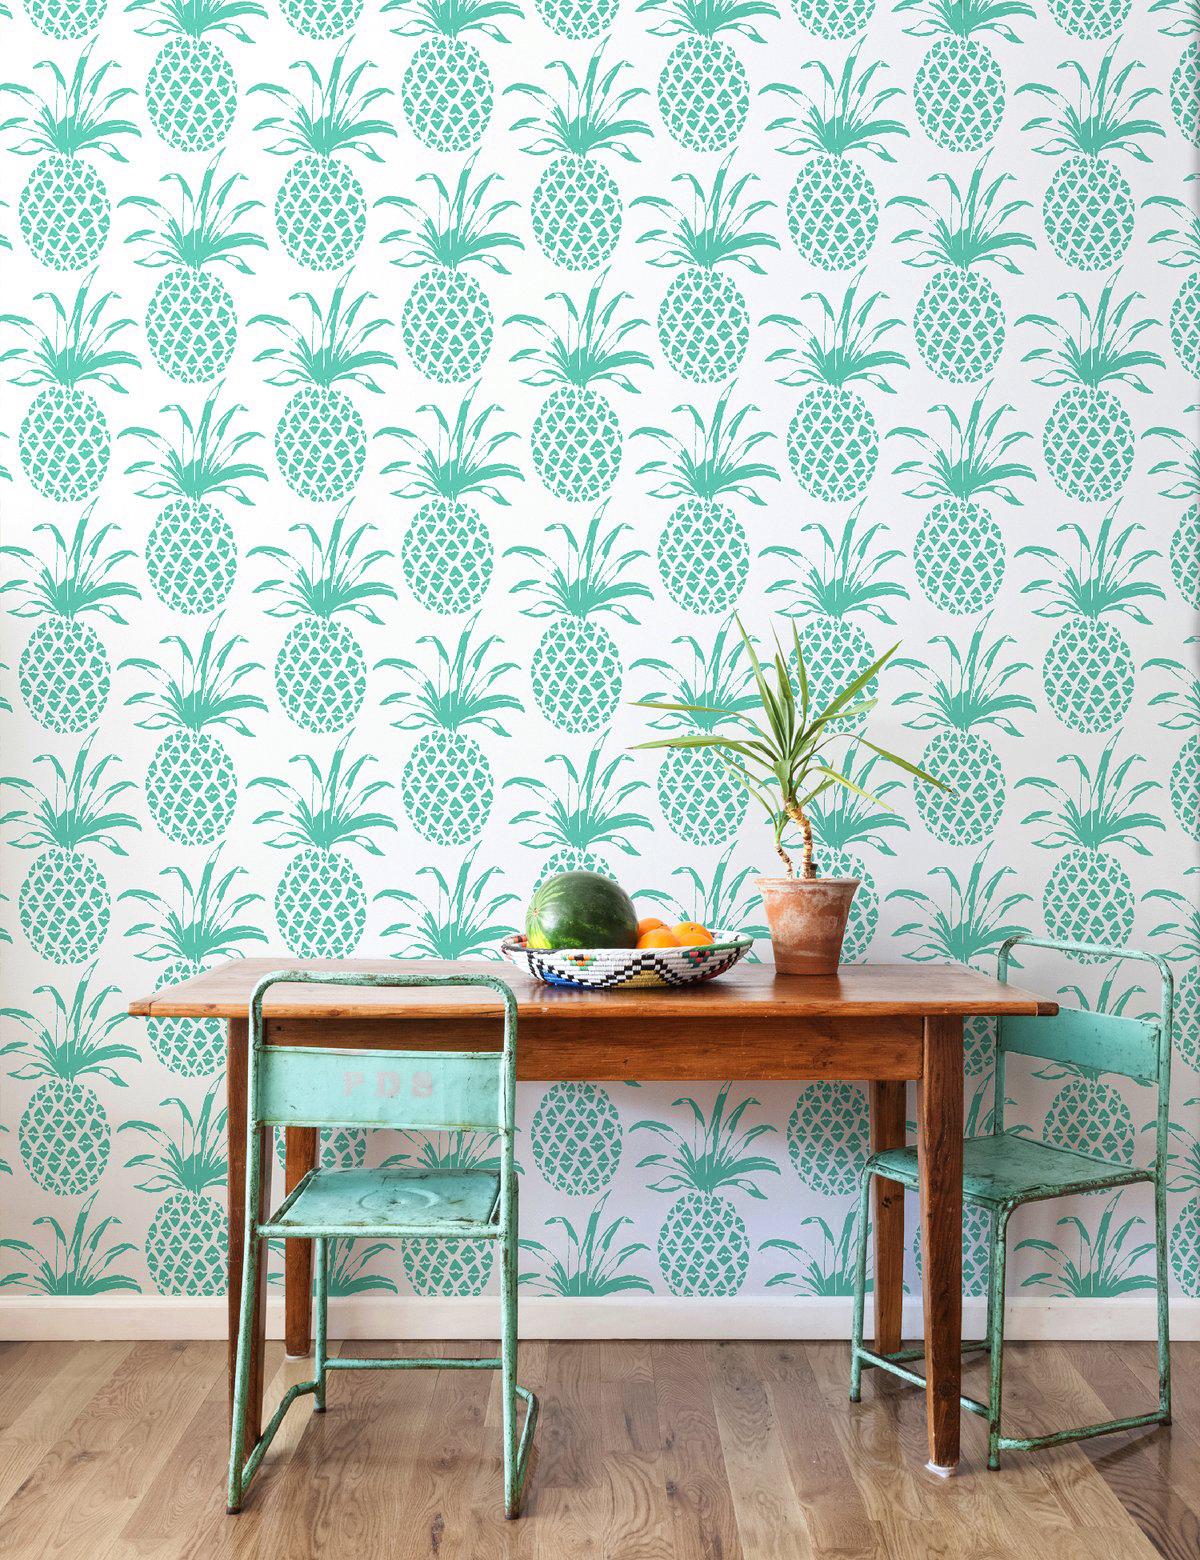 There's no better way to say welcome than with our pineapple wallpaper!
 
Samples are available for $18 including US shipping, please message us to purchase.  

Printing: Digital pigment print (minimum order of 4 rolls).
Material: FSC-certified